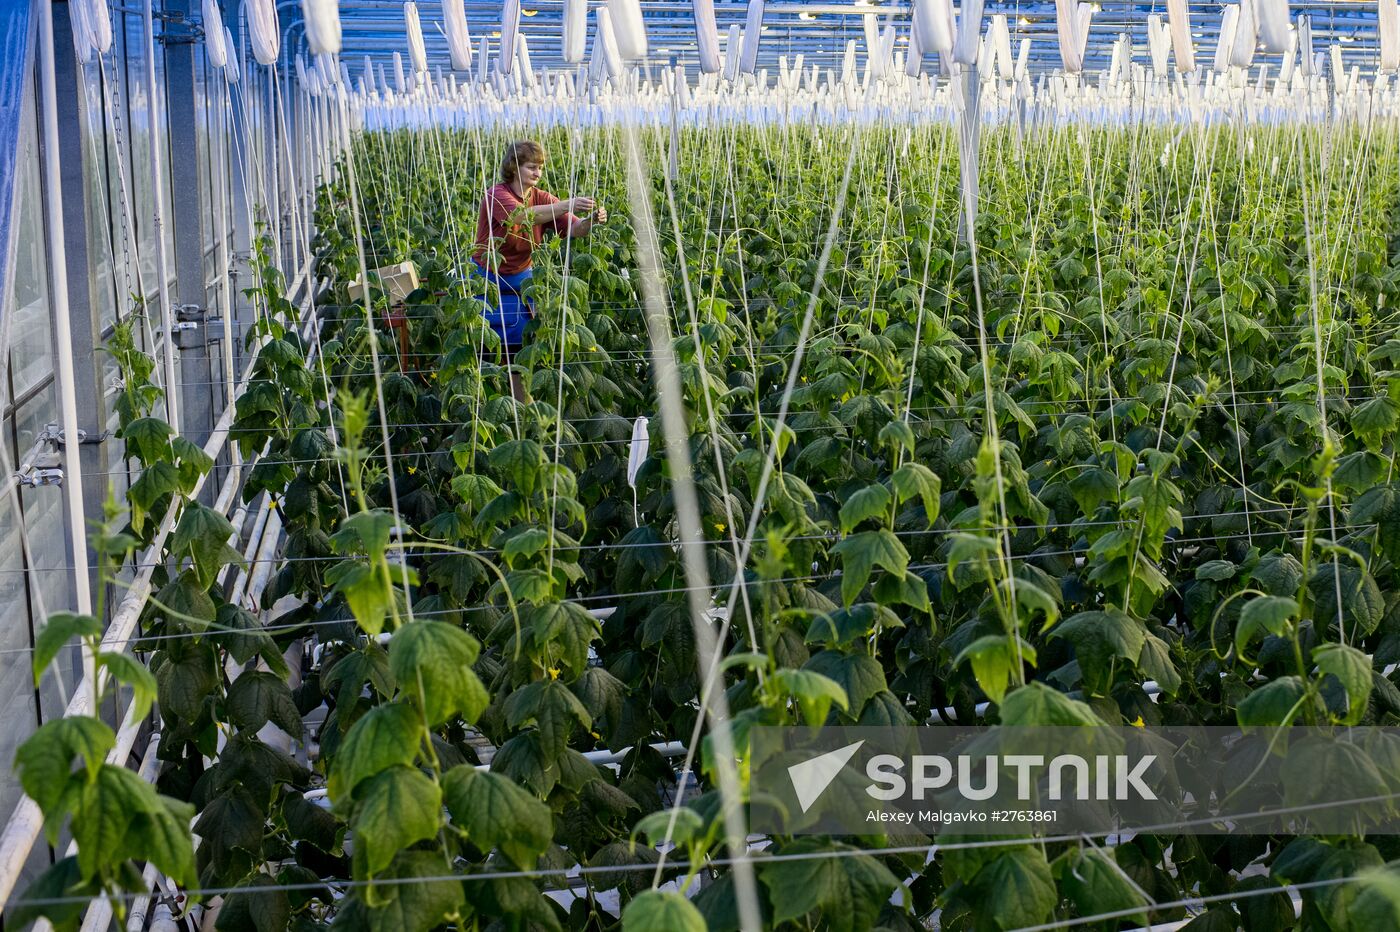 The Druzhino agricultural center in the Omsk Region